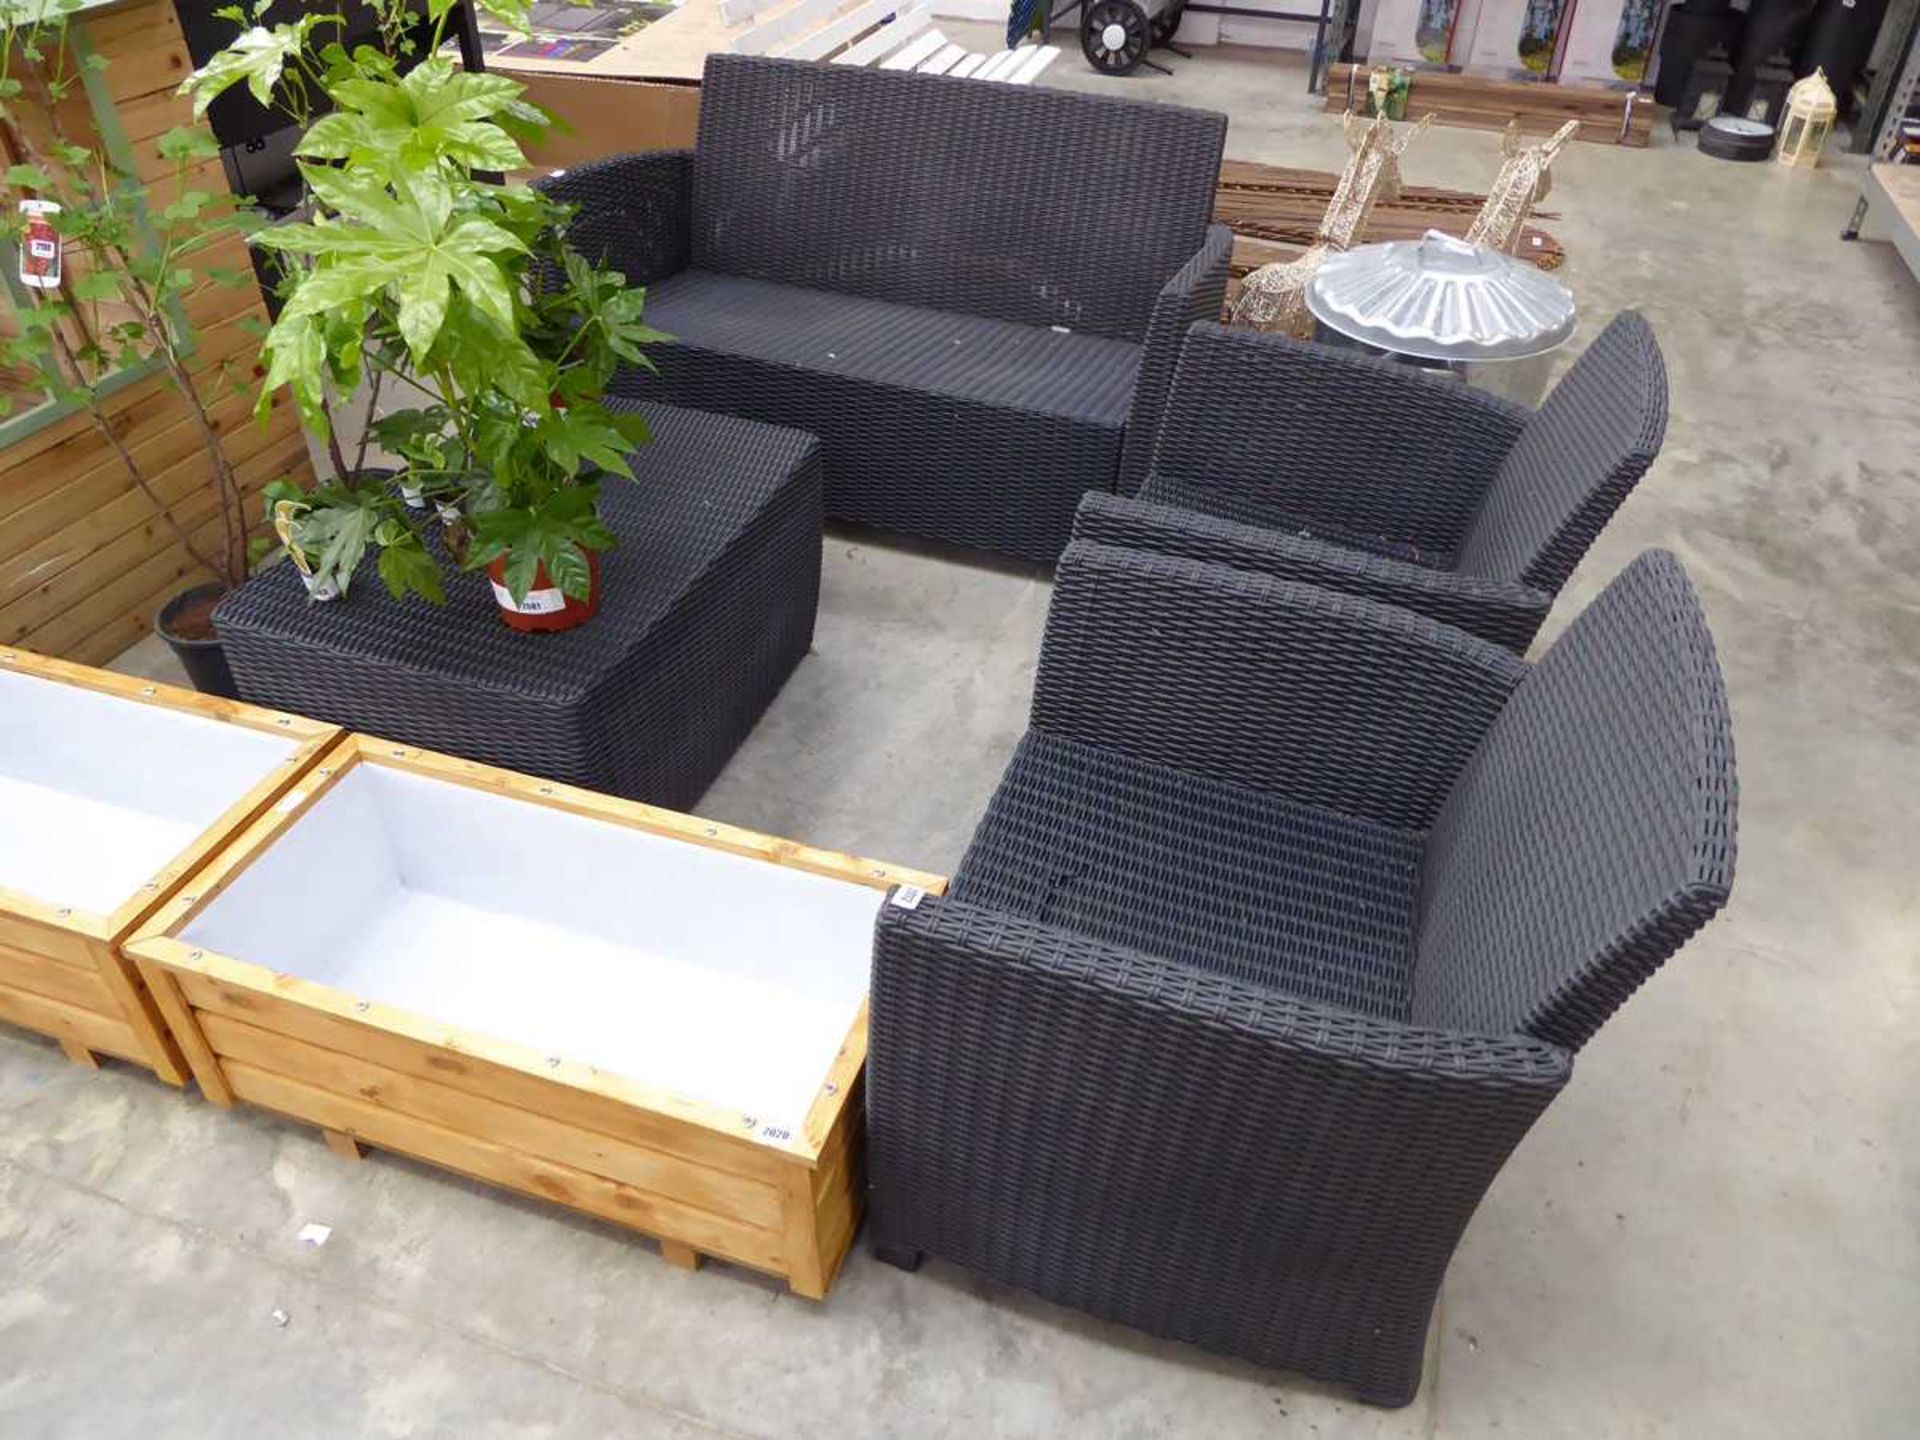 Black rattan 4 piece outdoor seating set, comprising 2 seater sofa, 2 matching armchairs and